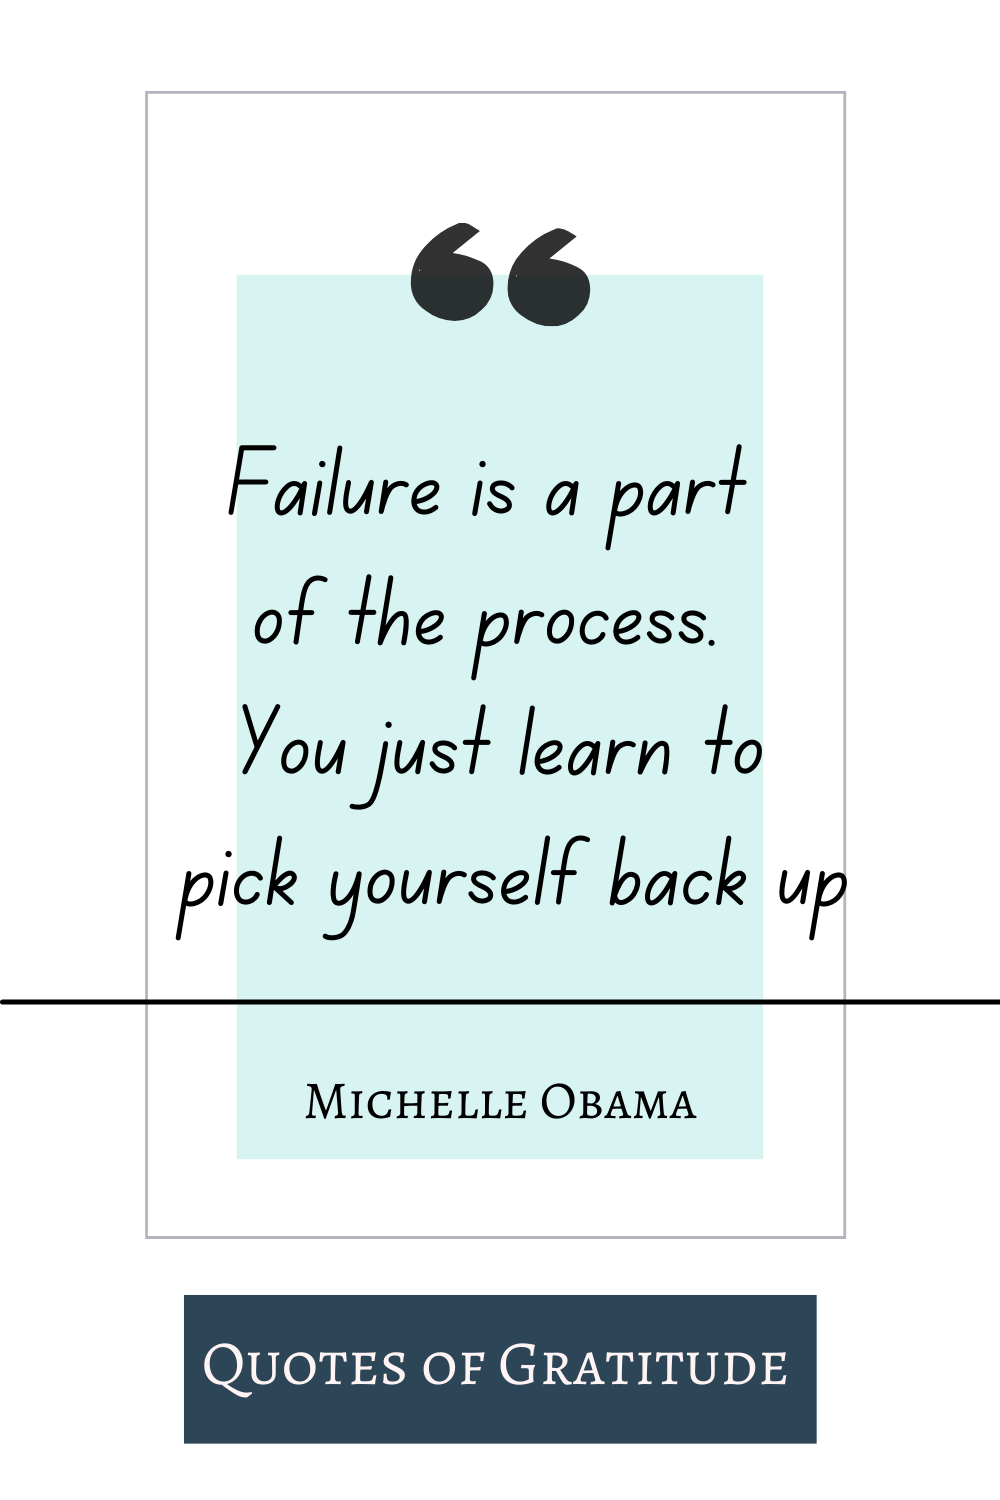 30 Life Changing Quotes to Get Over Failure